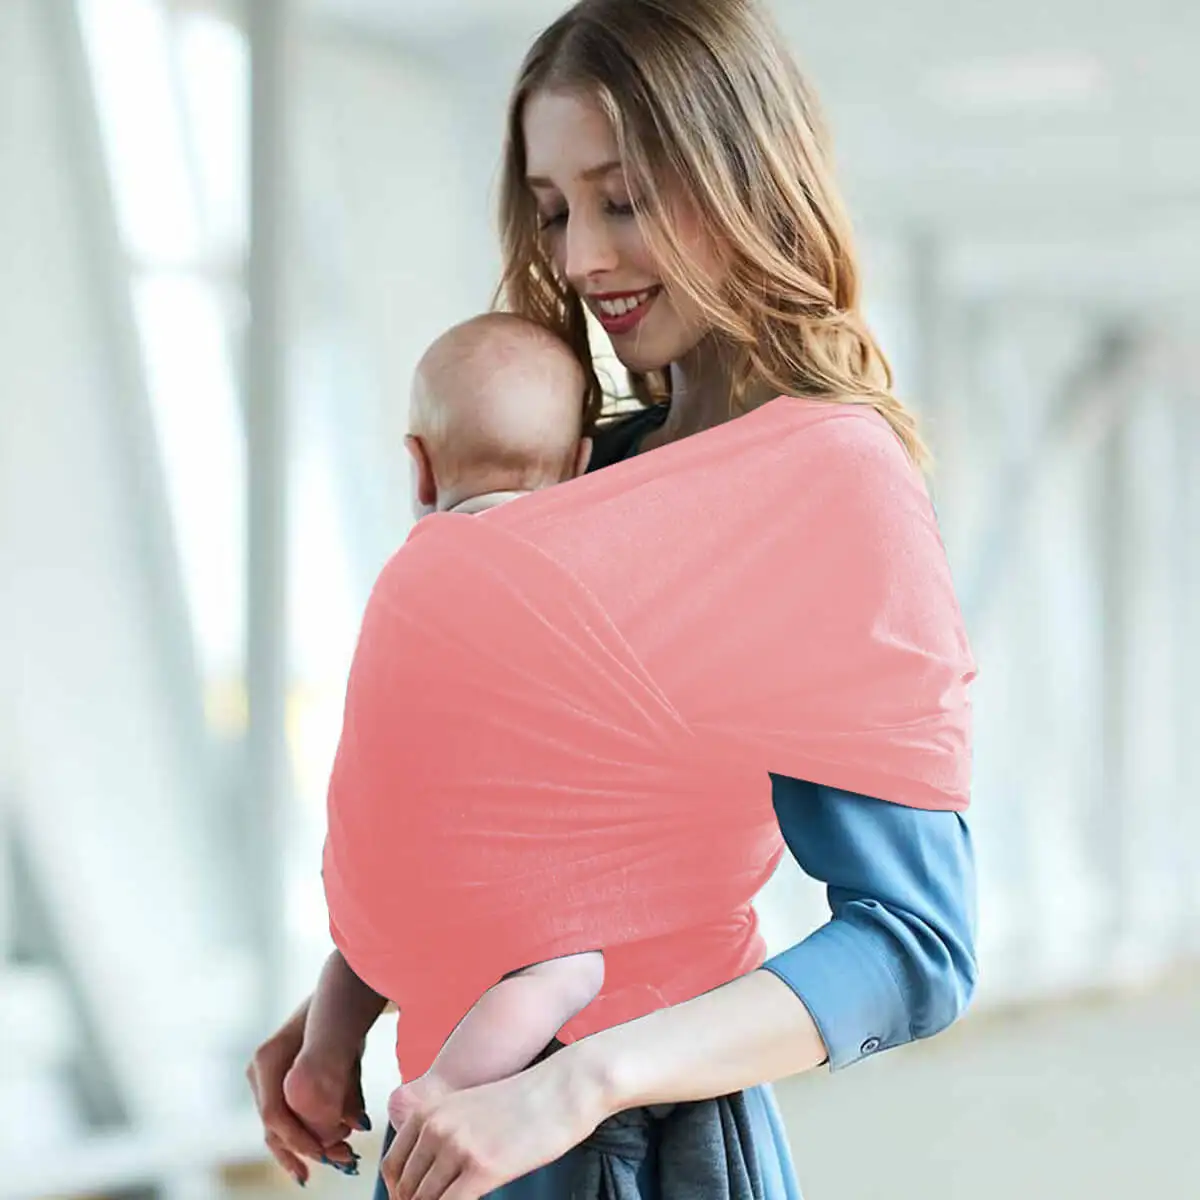 Baby Sling 100% Cotton - Baby Carrier Kangaroo 0-36 Months gray pink One Size and sturdy fabric suitable for all